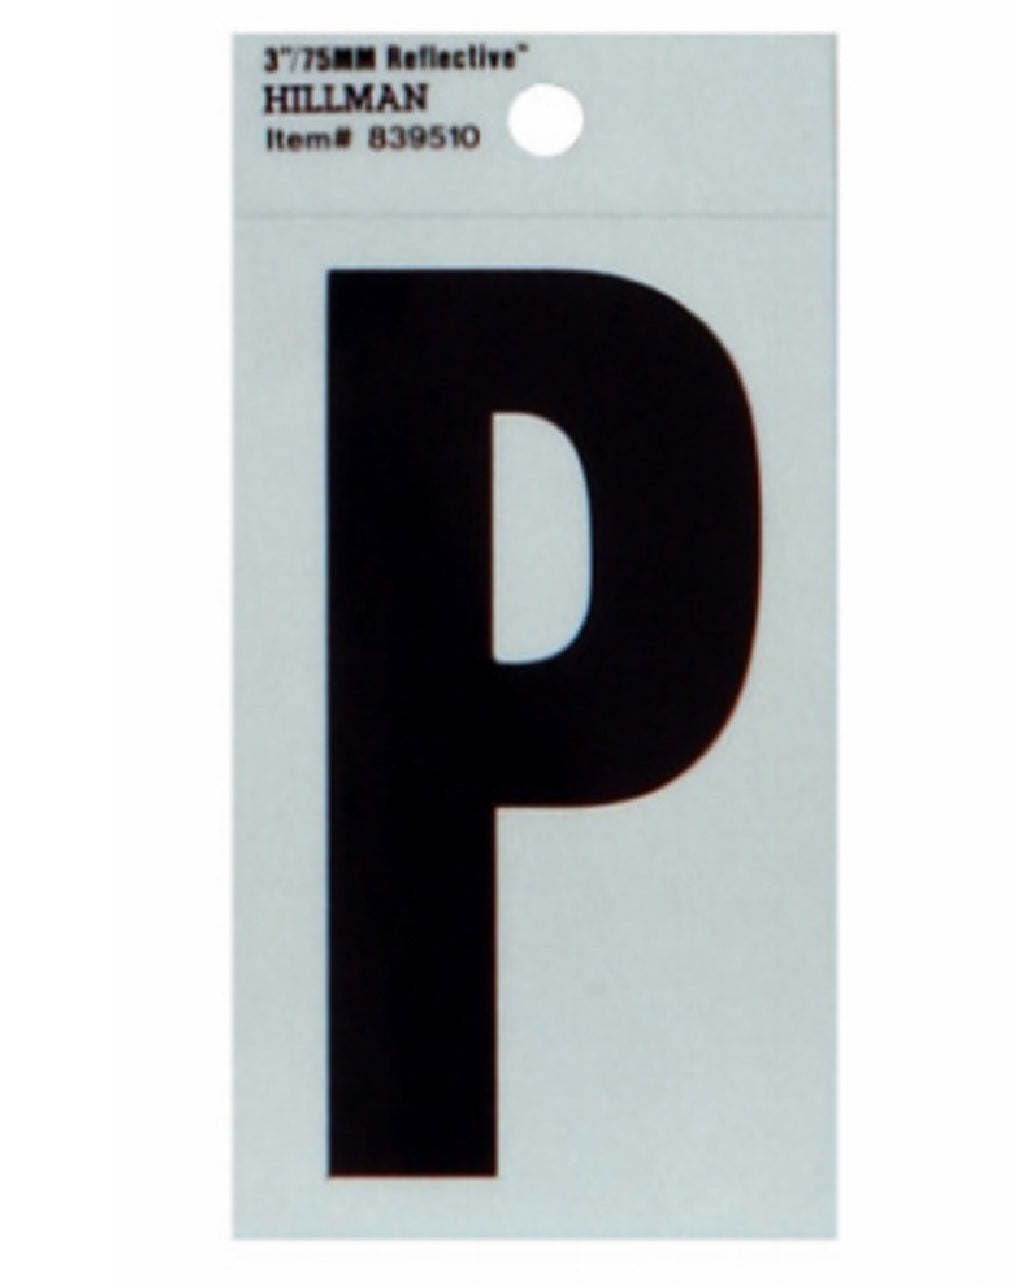 Hillman Fasteners 839510 Reflective Adhesive Vinyl Letter P Sign, 3 Inch